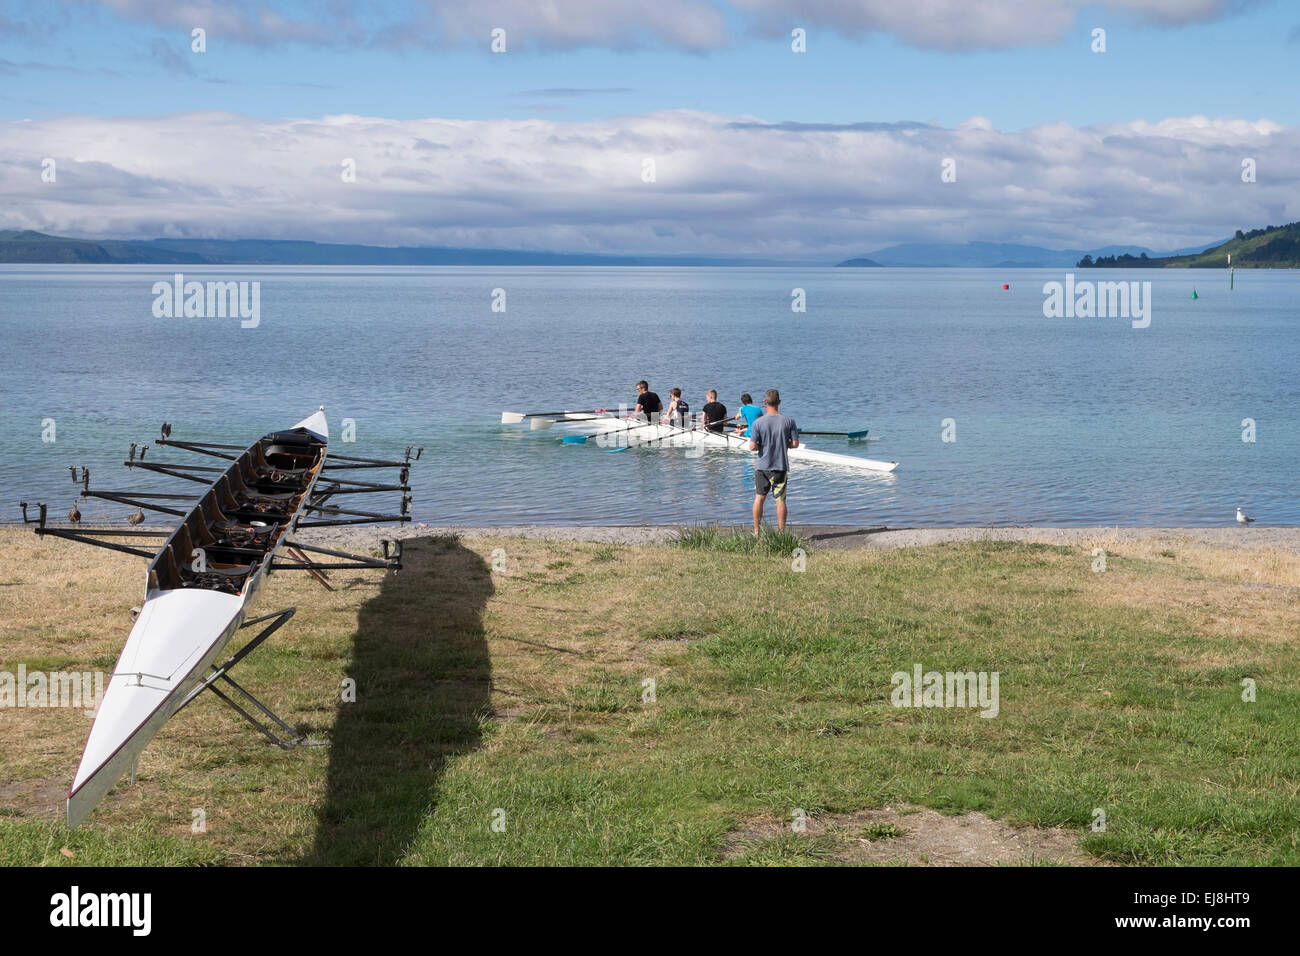 Rowers on lake Taupo in New Zealand. Stock Photo